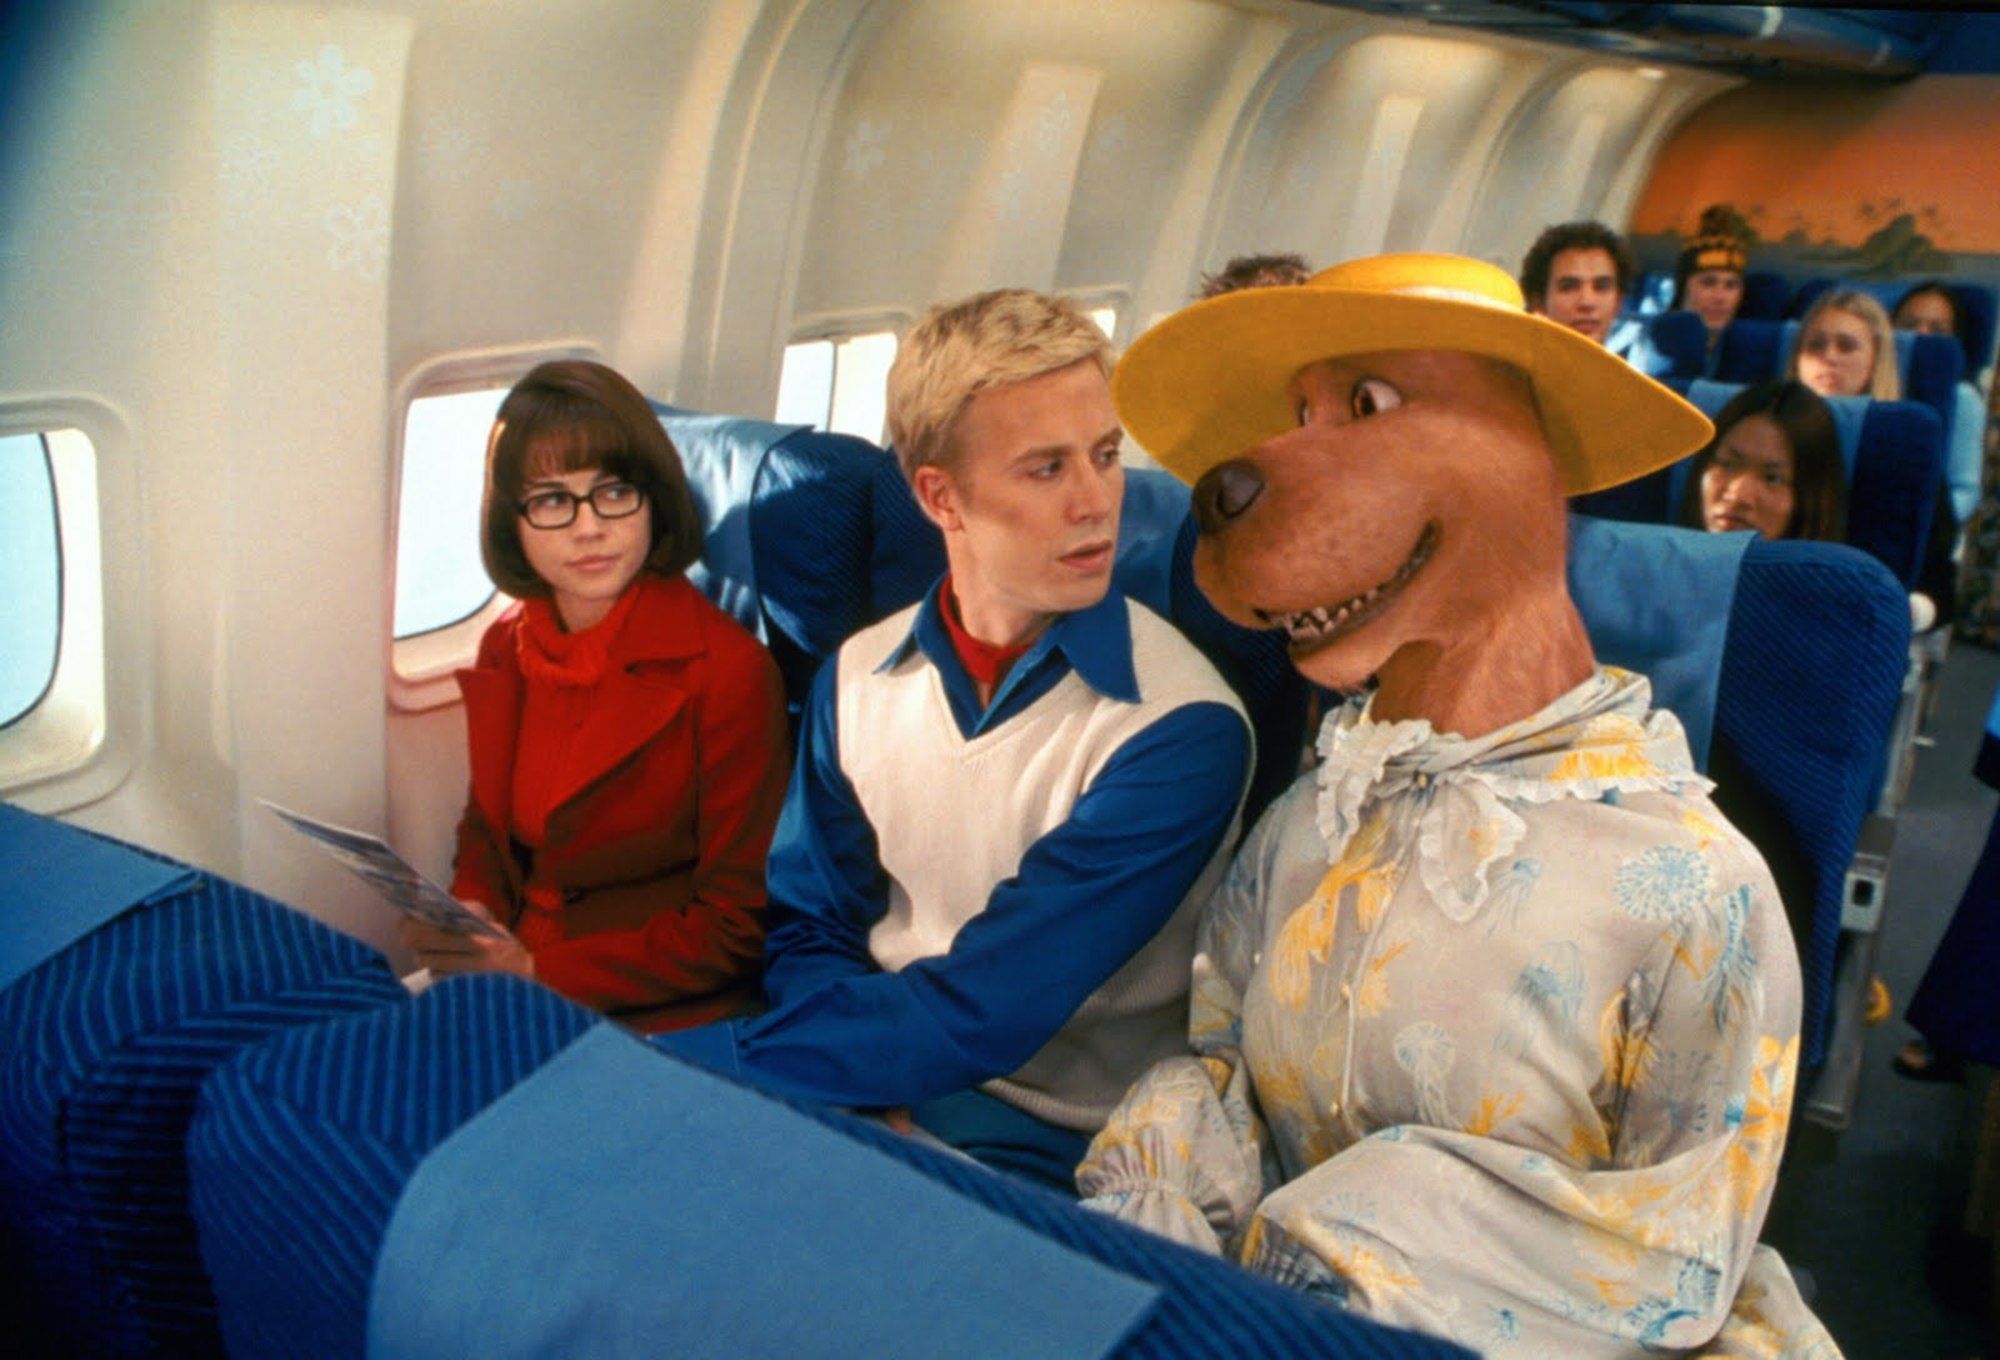 it's been 16 years and i still cant understand how the heck they got to sneak Scooby Doo in a plane with that costume